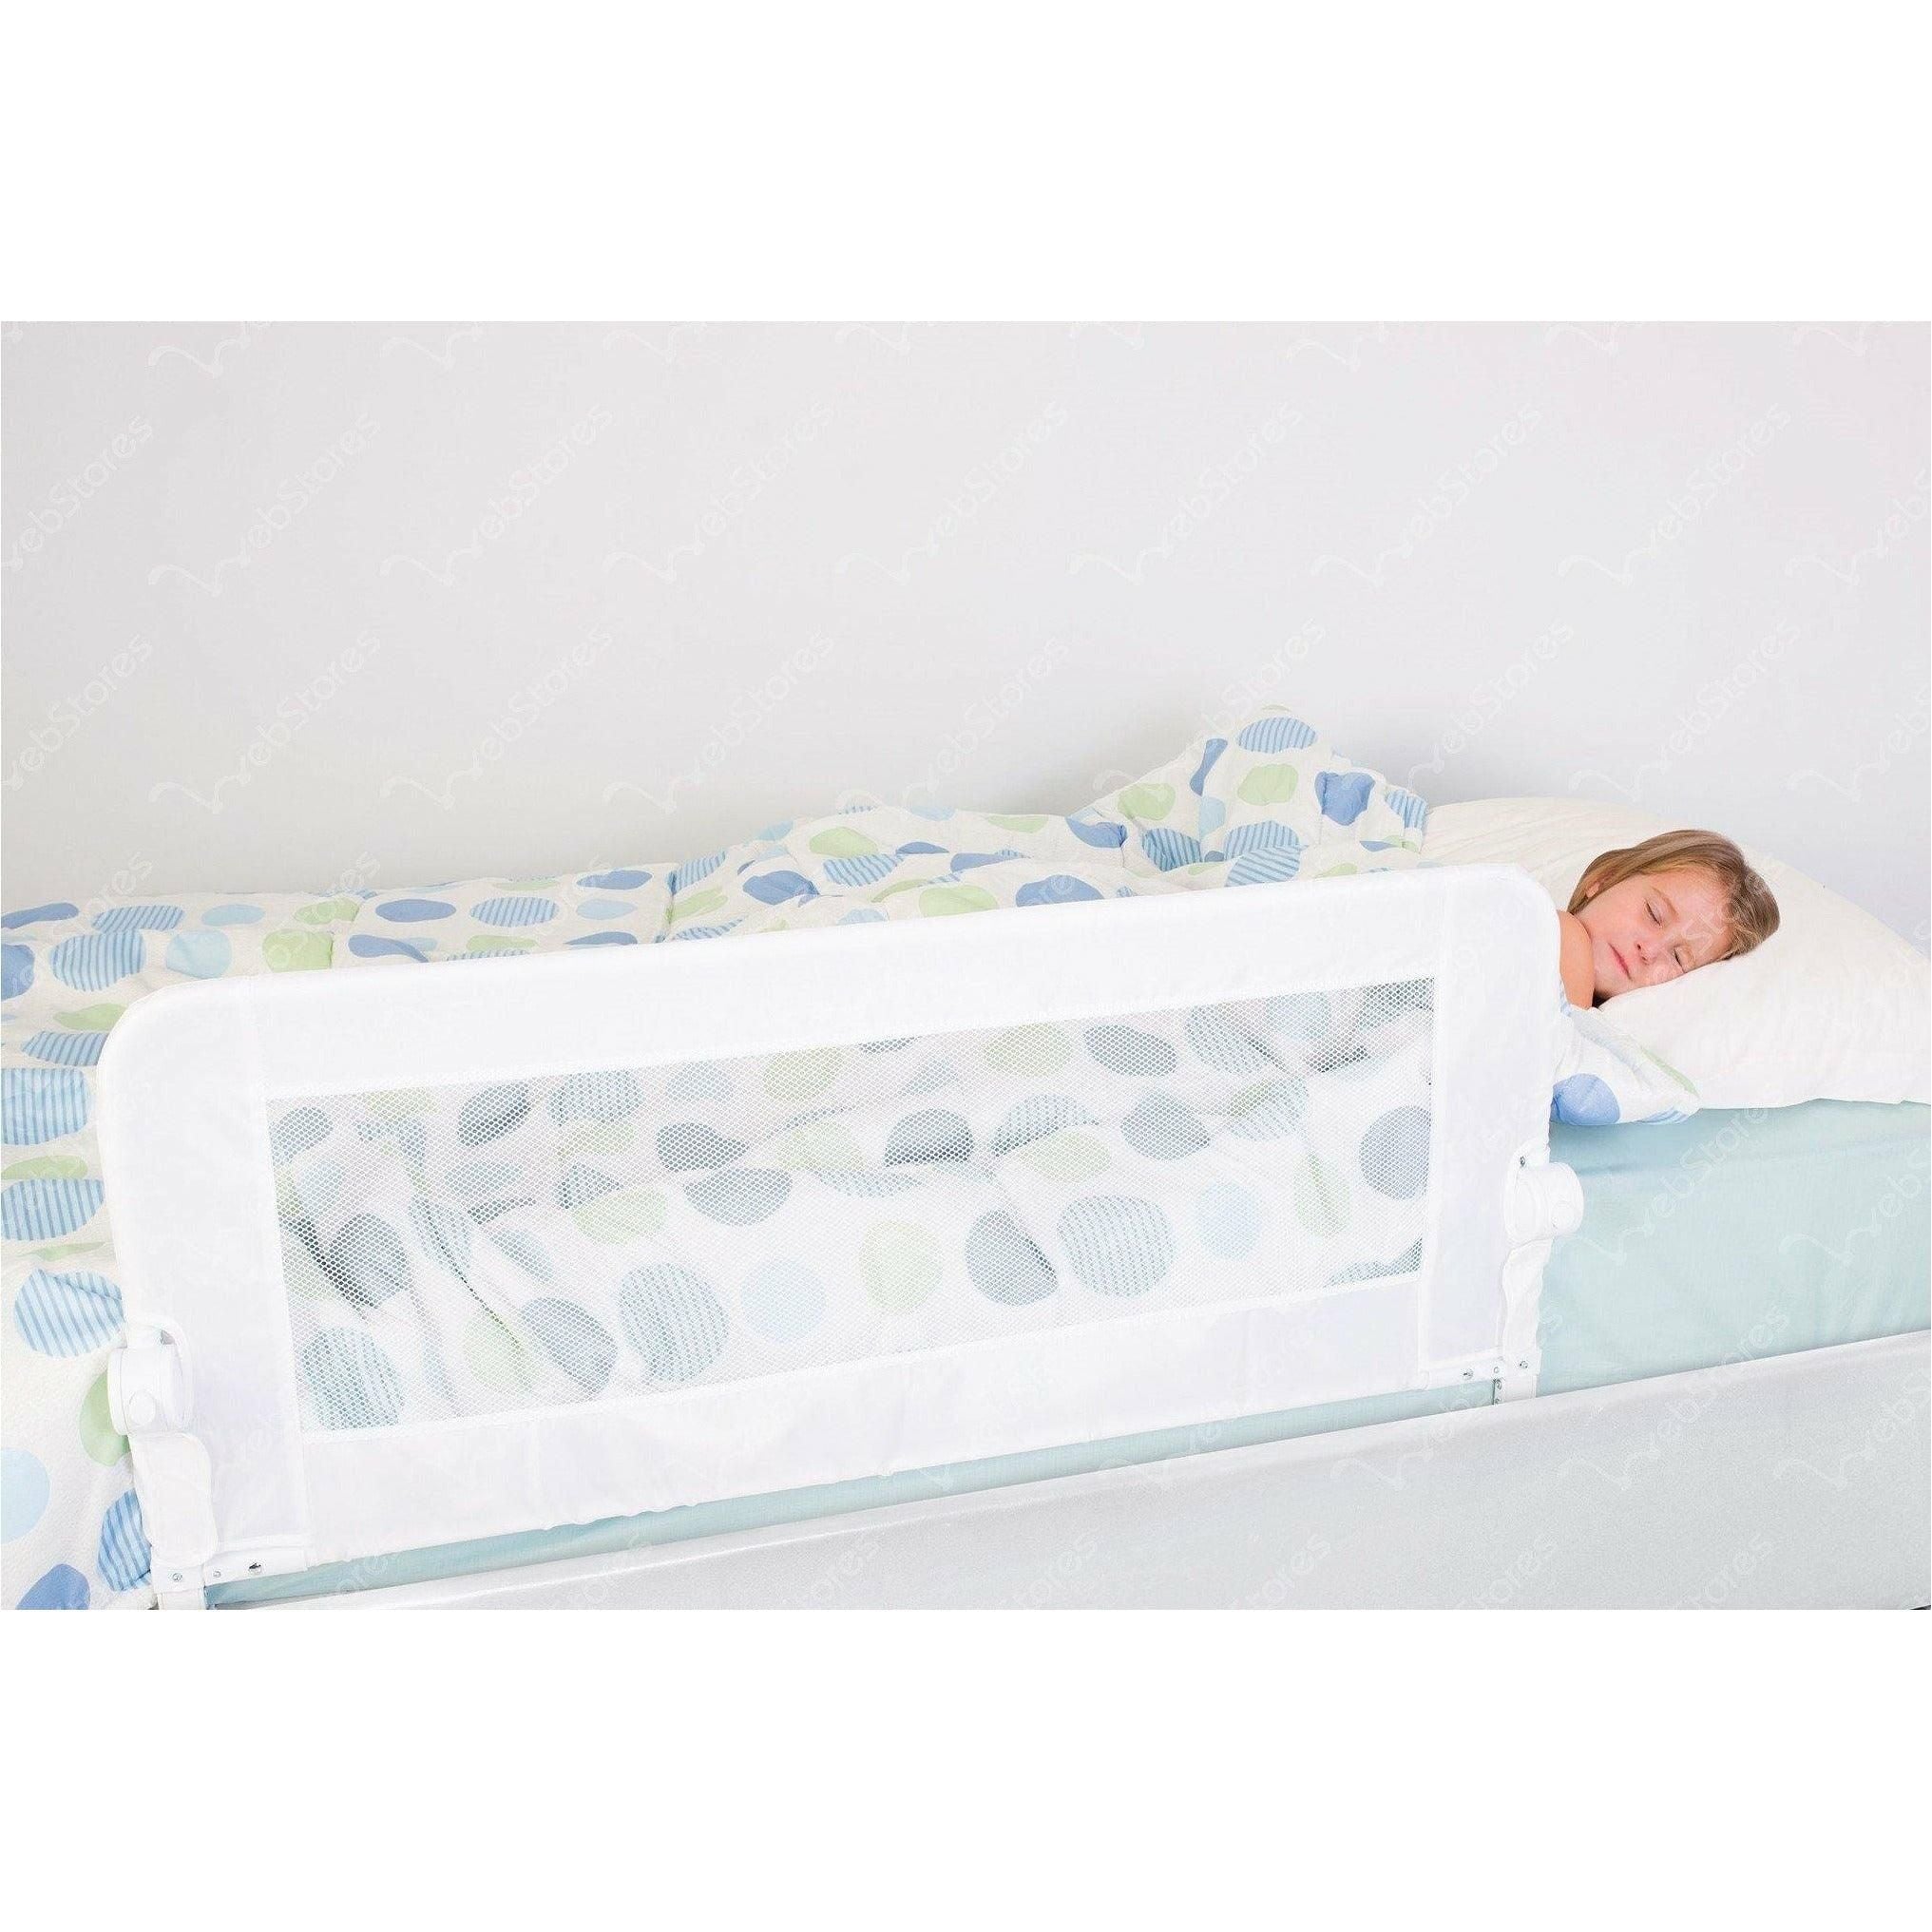 Dream Baby F7742 Maggie Bed Rail White 110 x 50 cm - BumbleToys - 0-24 Months, Baby Saftey & Health, Boys, Cecil, Girls, Pre-Order